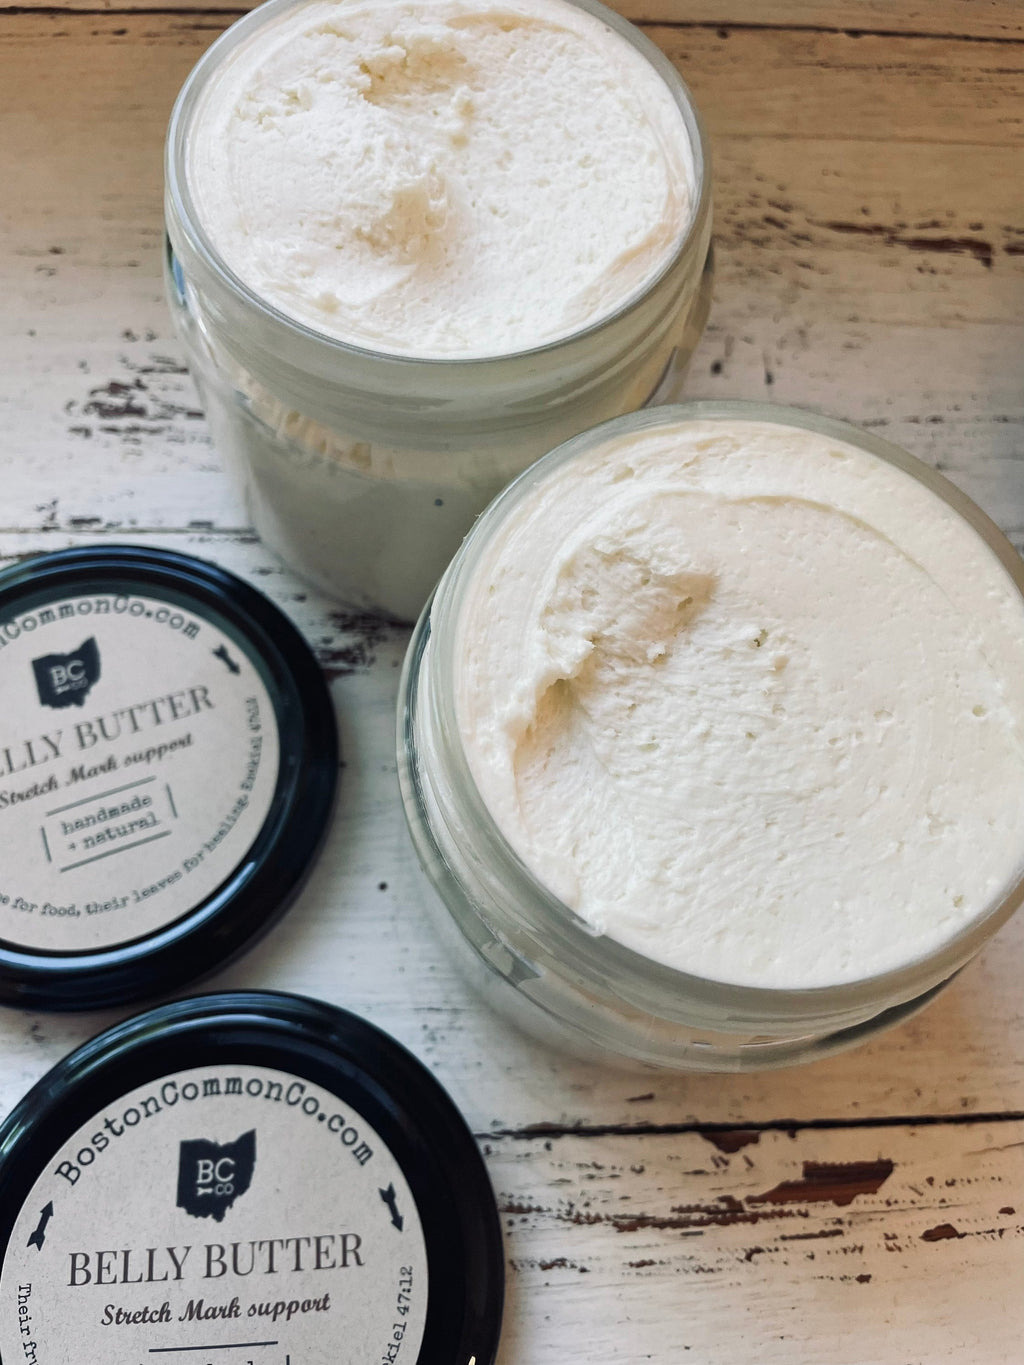 Belly Butter - All Natural and Handmade 